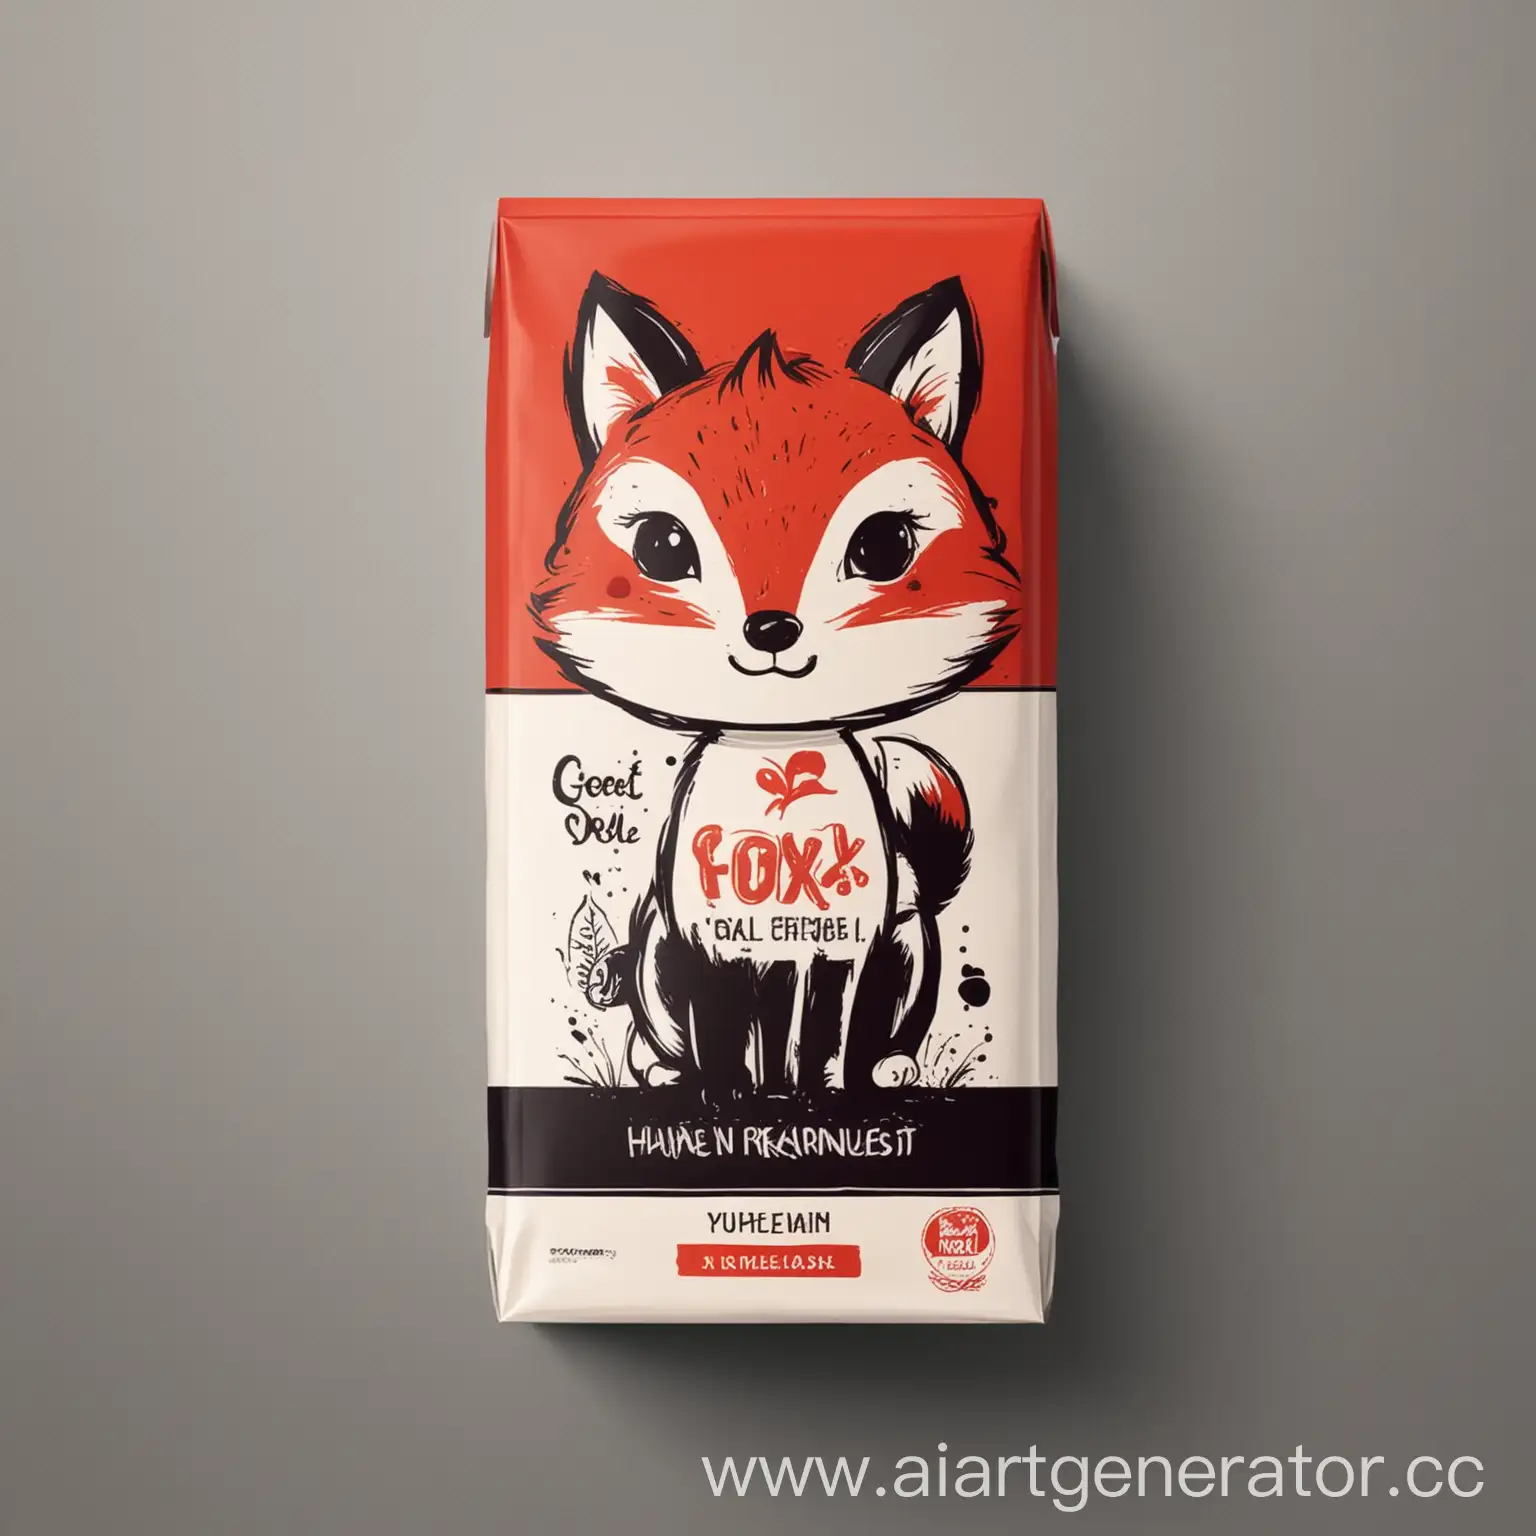 Minimalist-Red-Black-and-White-Rectangular-Background-with-Fox-Mascot-for-Dairy-Products-Cover